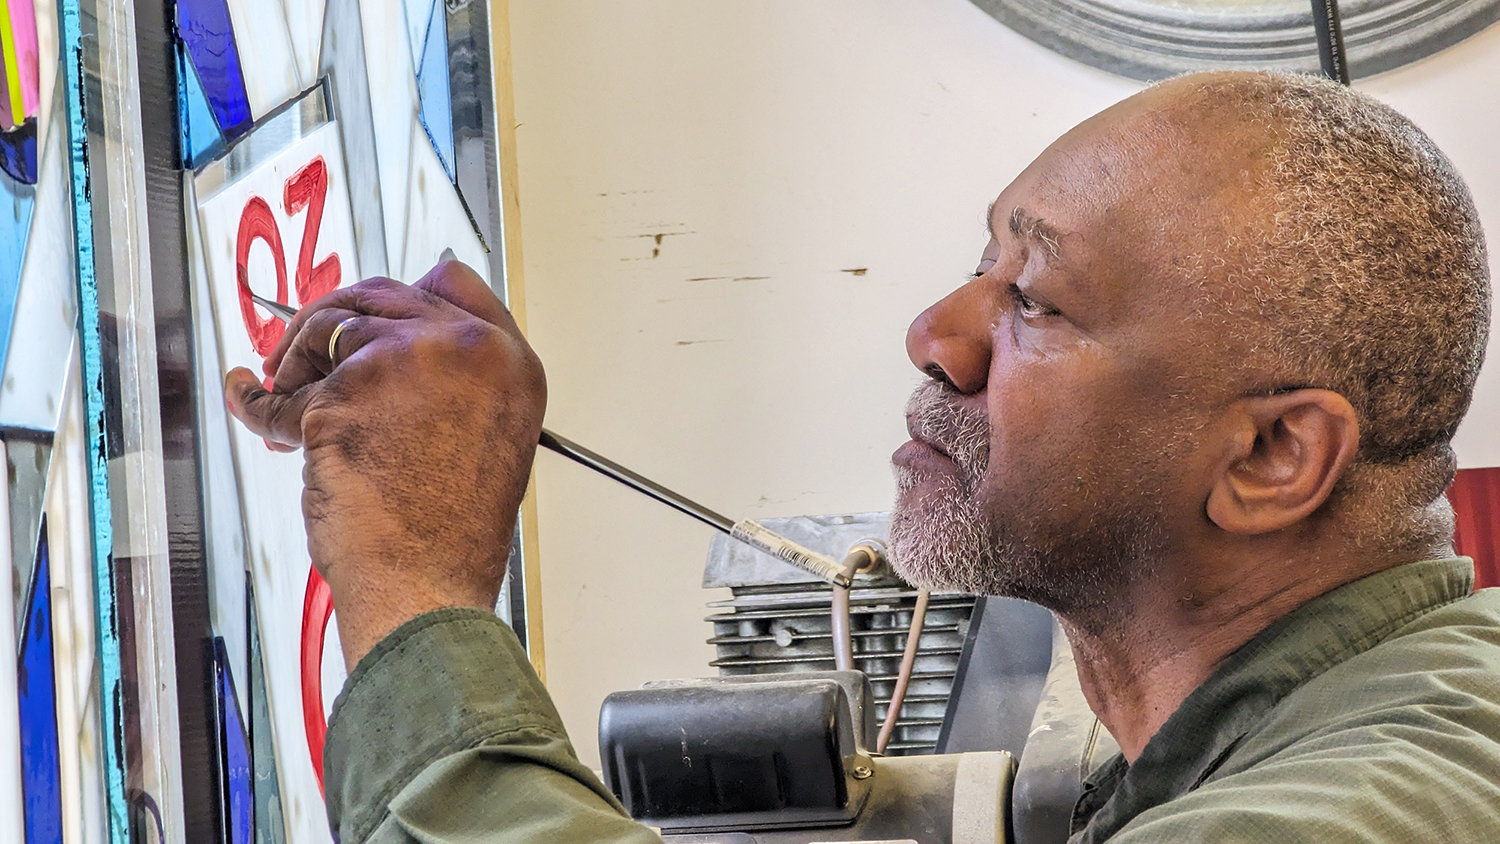 Kerry James Marshall paints the letters of one of the signs included in the new stained glass window. Photo courtesy of Washington National Cathedral